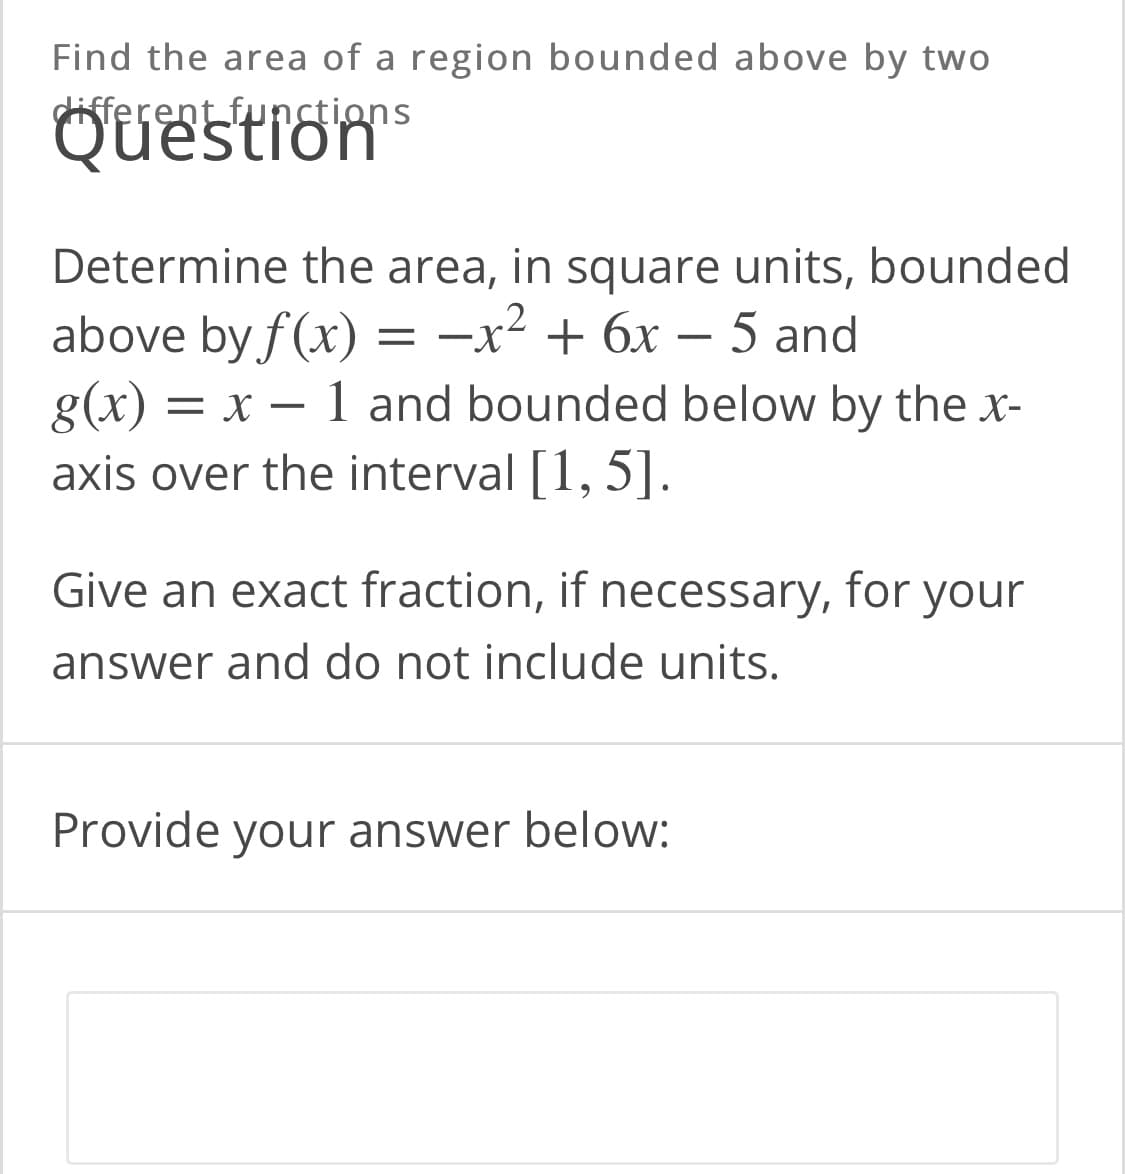 Find the area of a region bounded above by two
different funstions
Questrom
Determine the area, in square units, bounded
above by f(x) = -x² + 6x – 5 and
g(x) = x – 1 and bounded below by the x-
axis over the interval [1, 5].
||
Give an exact fraction, if necessary, for your
answer and do not include units.
Provide your answer below:
